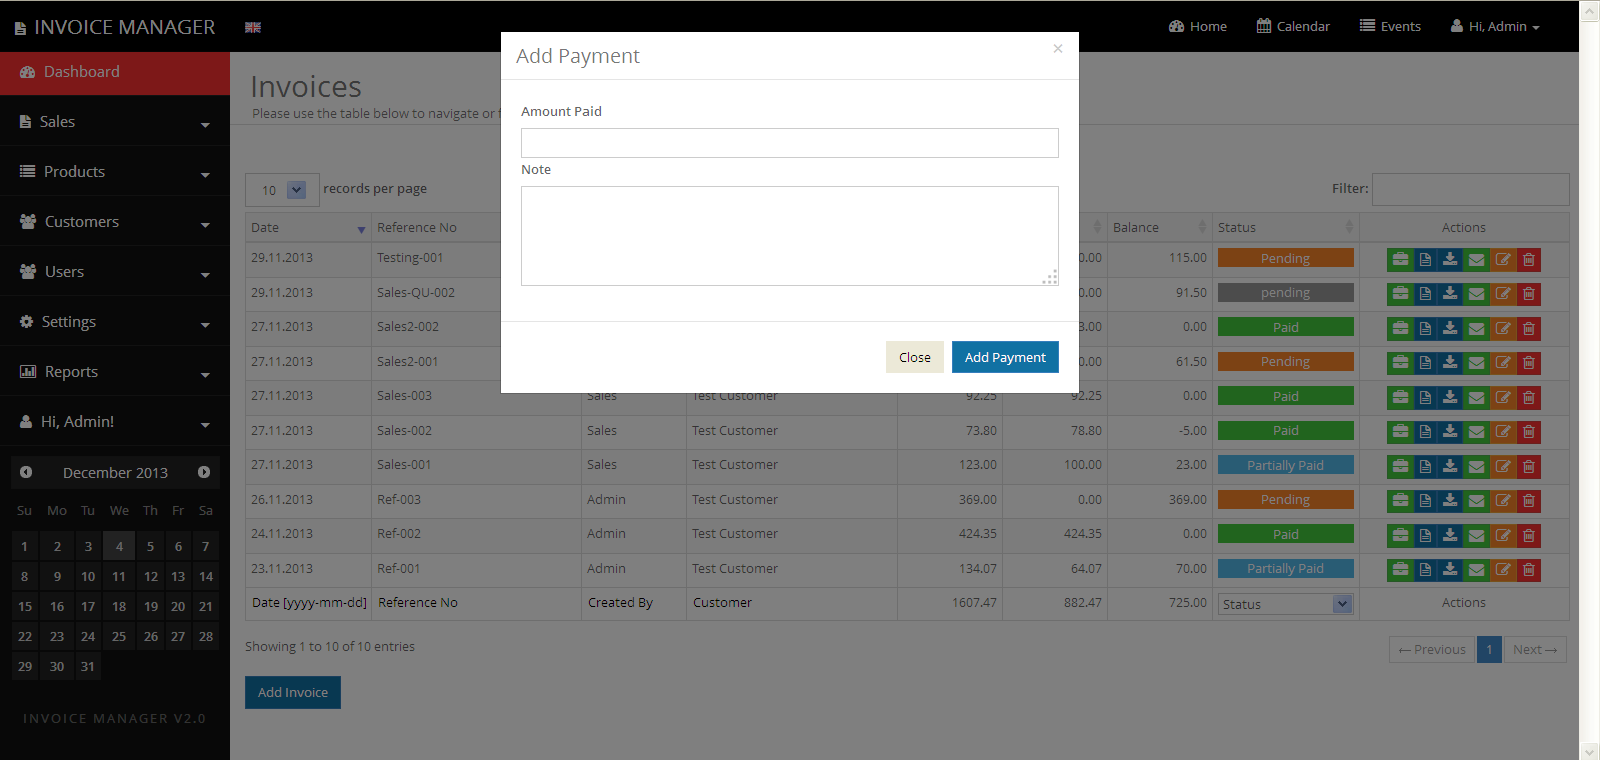 Simple Invoice Manager Invoicing Made Easy By Tecdiary Codecanyon